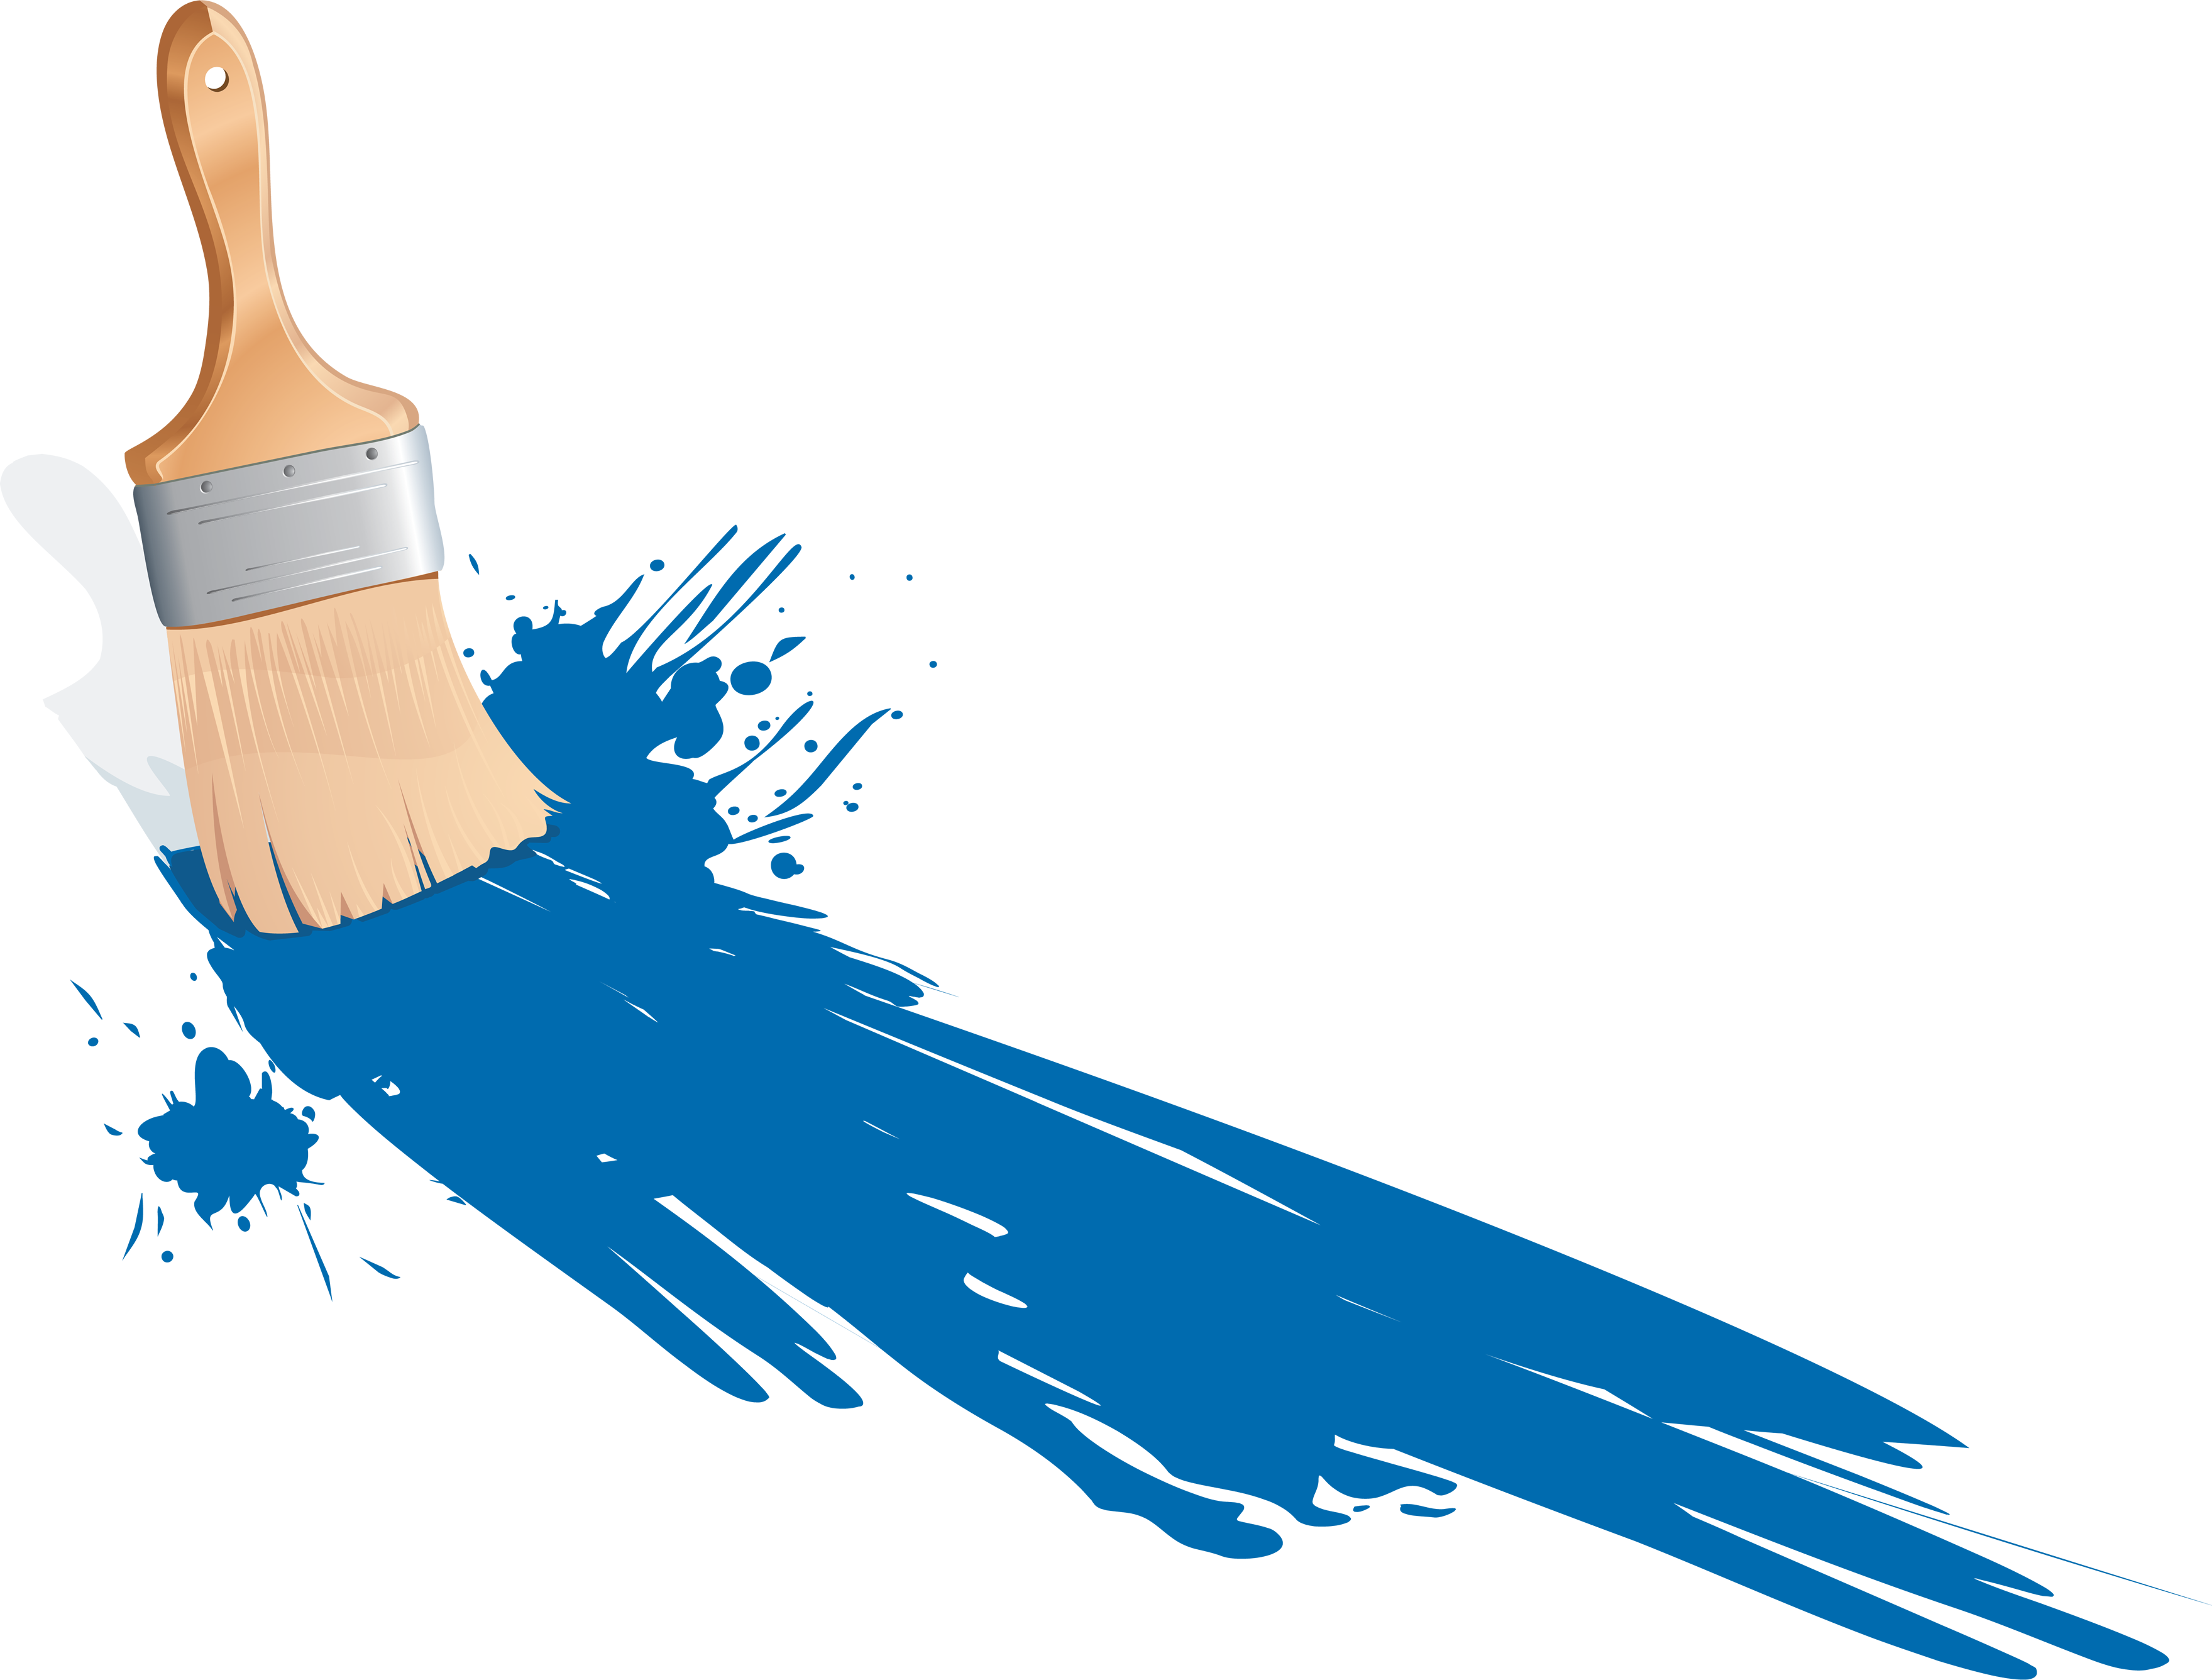 Paint Brush Free Download Png